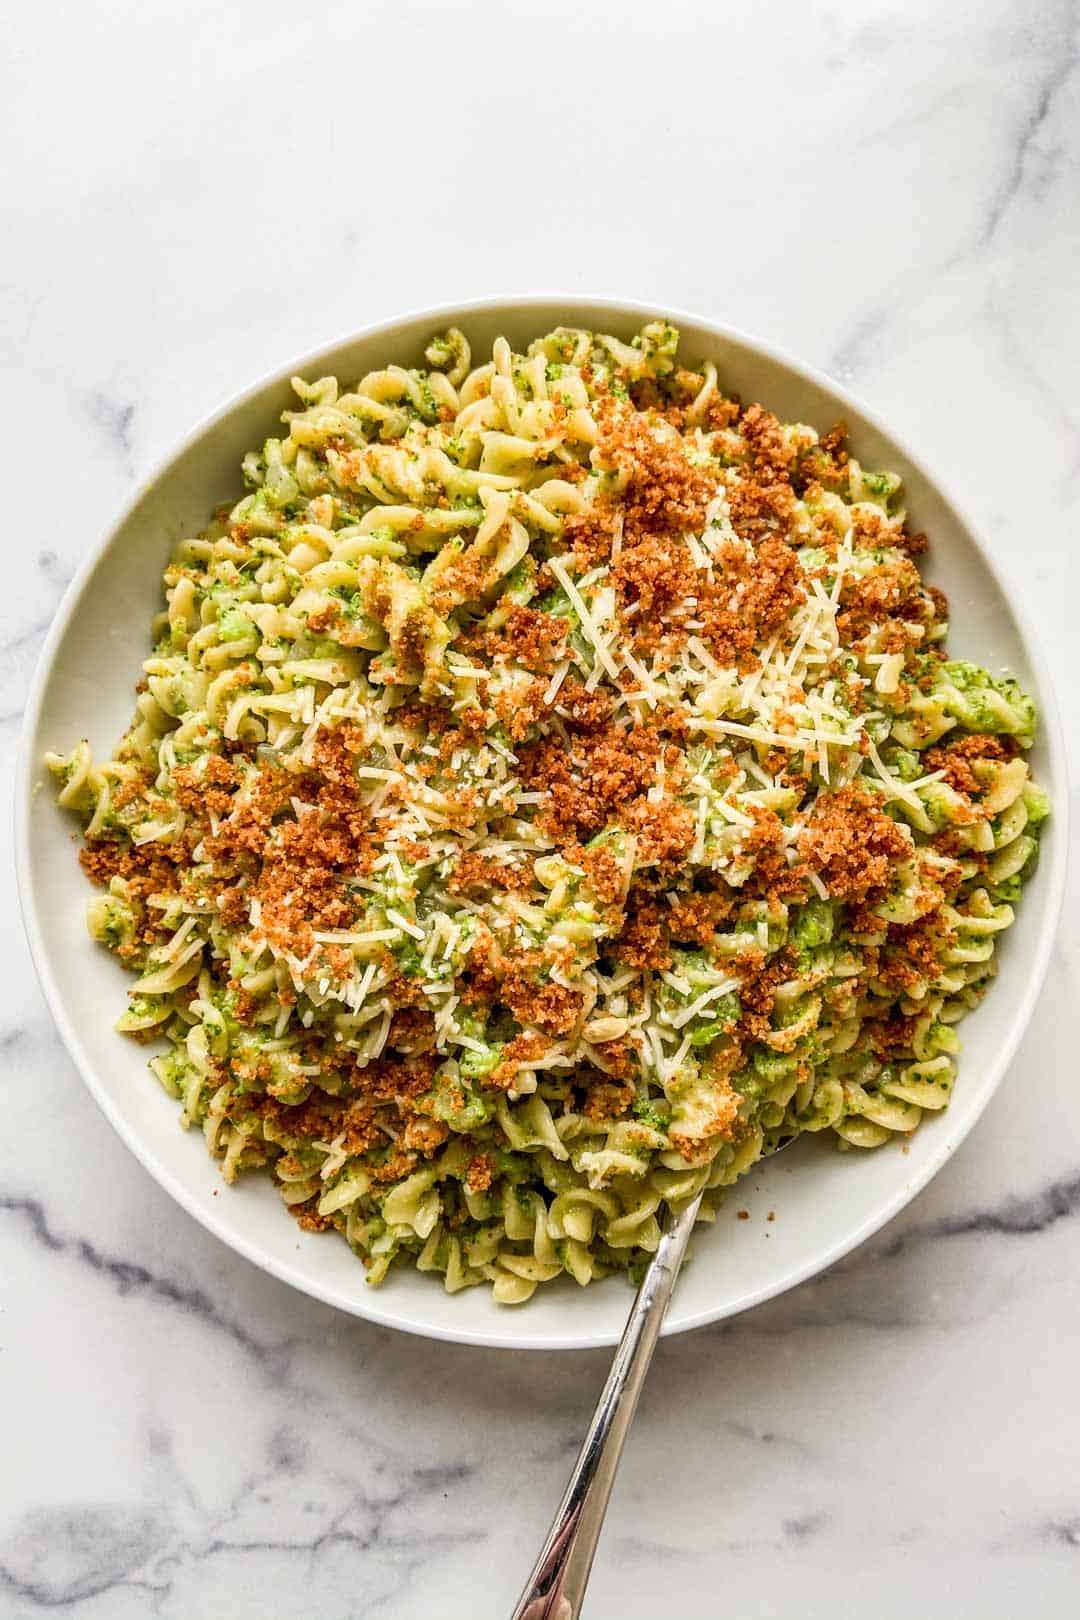 Broccoli pasta in a large serving bowl with a spoon.